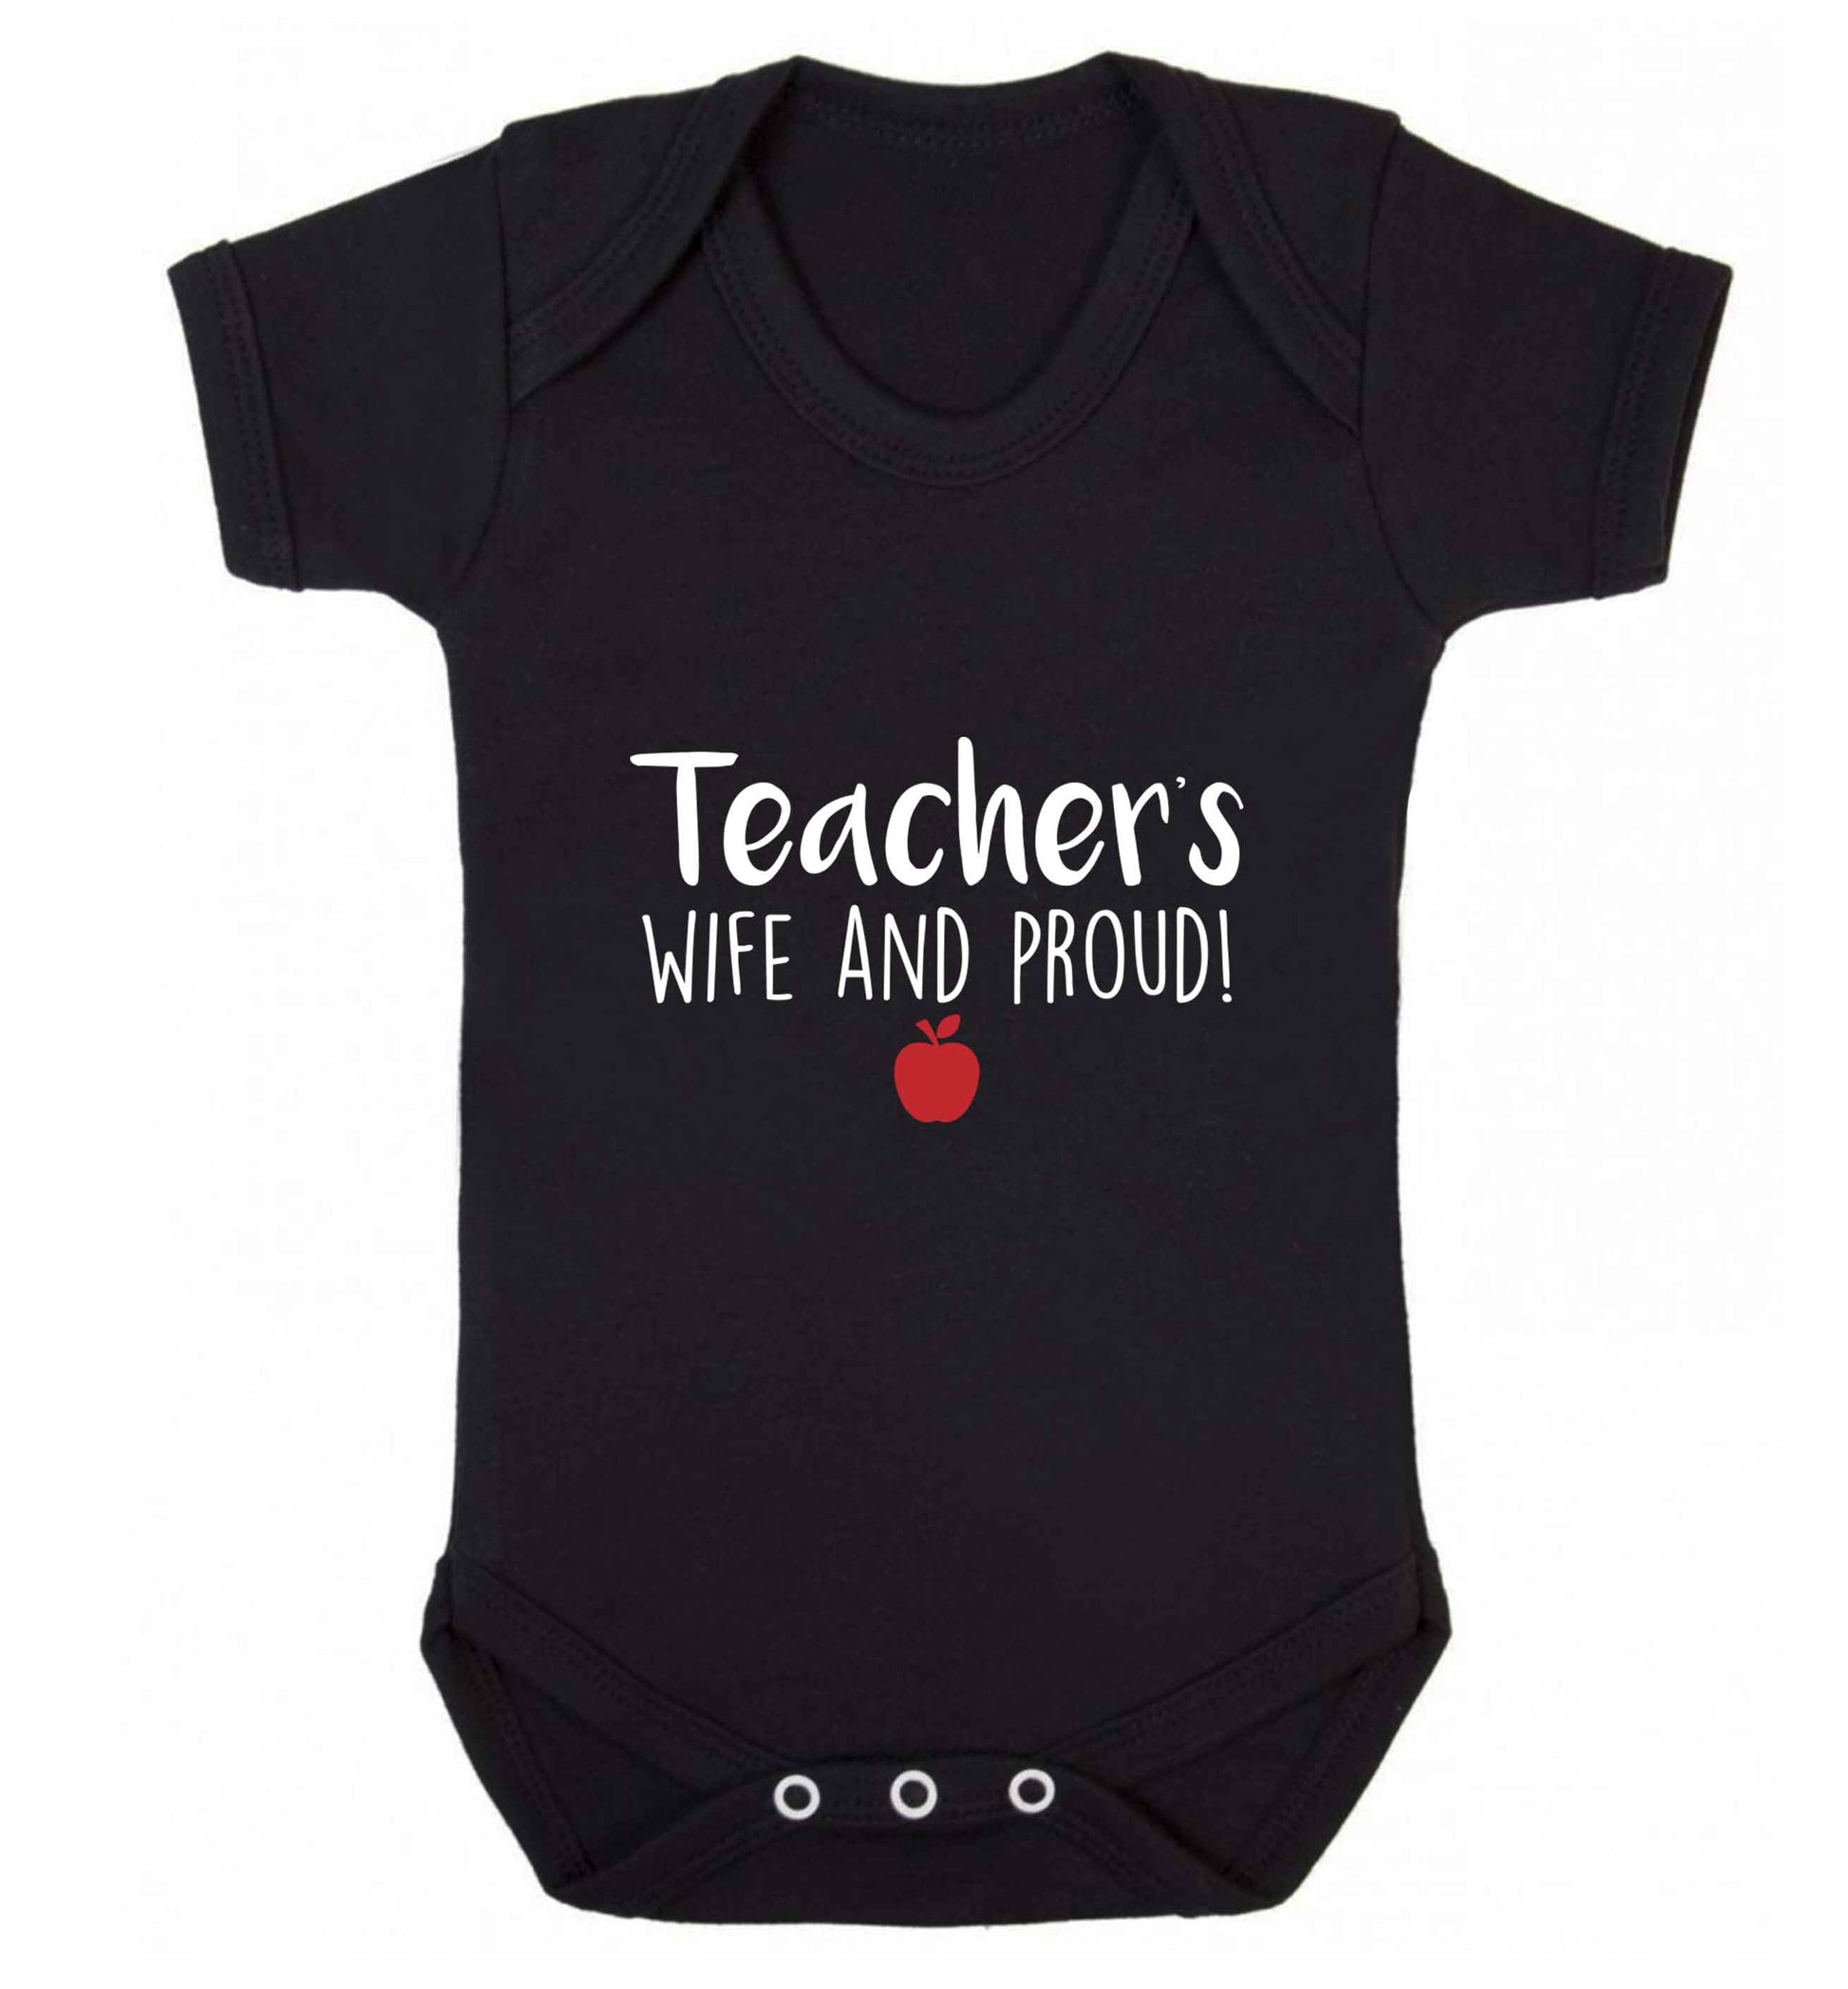 Teachers wife and proud baby vest black 18-24 months